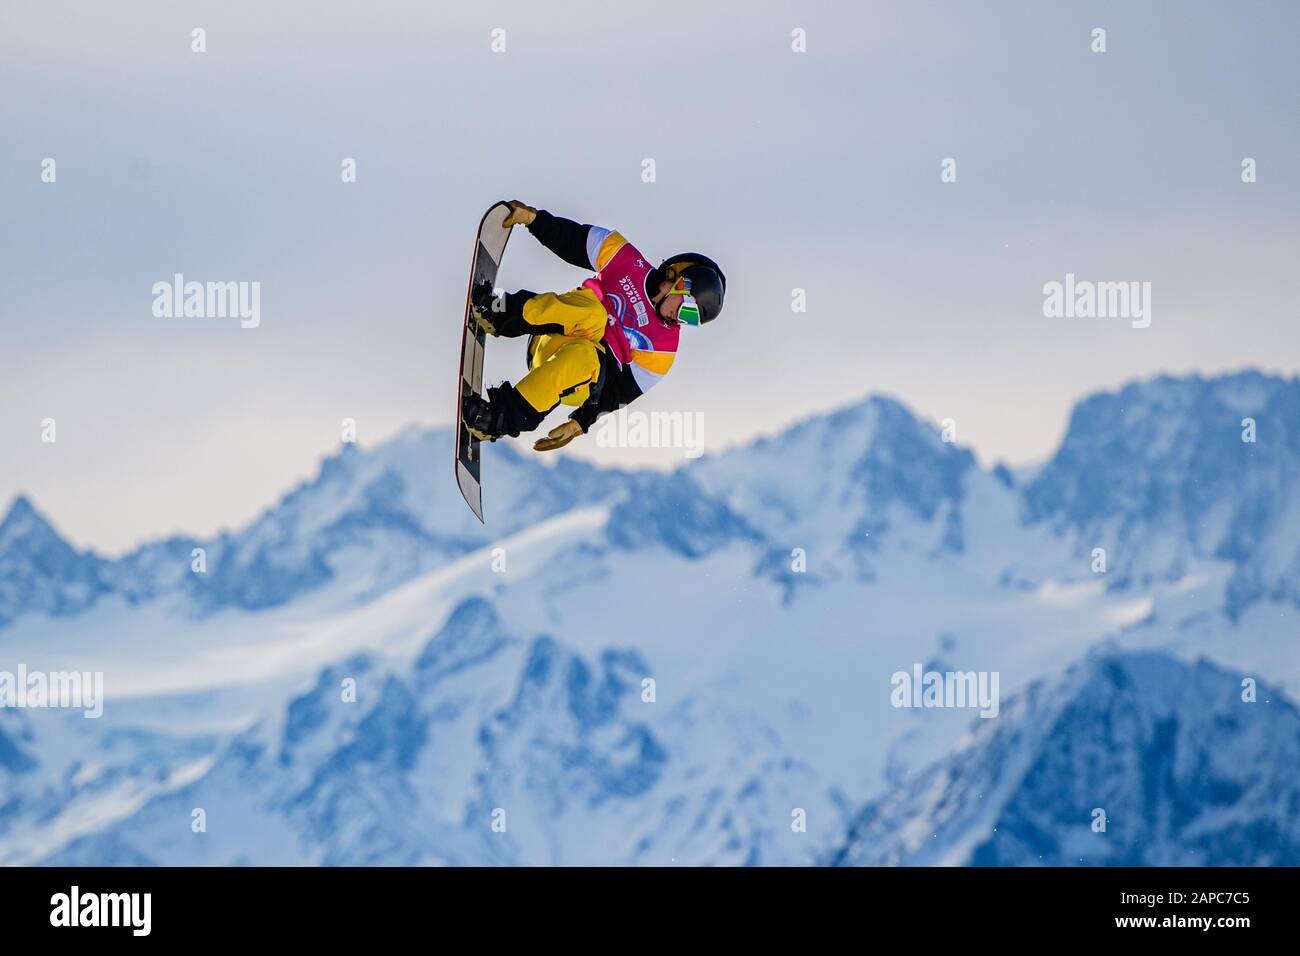 LAUSANNE, SWITZERLAND. 22th, Jan 2020. HENRICKSEN Dusty (USA) competes in the Snowboard: Men's Big Air competitions during the Lausanne 2020 Youth Olympic Games at Leysin Park & Pipe on Wednesday, 22 January 2020. LAUSANNE, SWITZERLAND. Credit: Taka G Wu/Alamy Live News Stock Photo